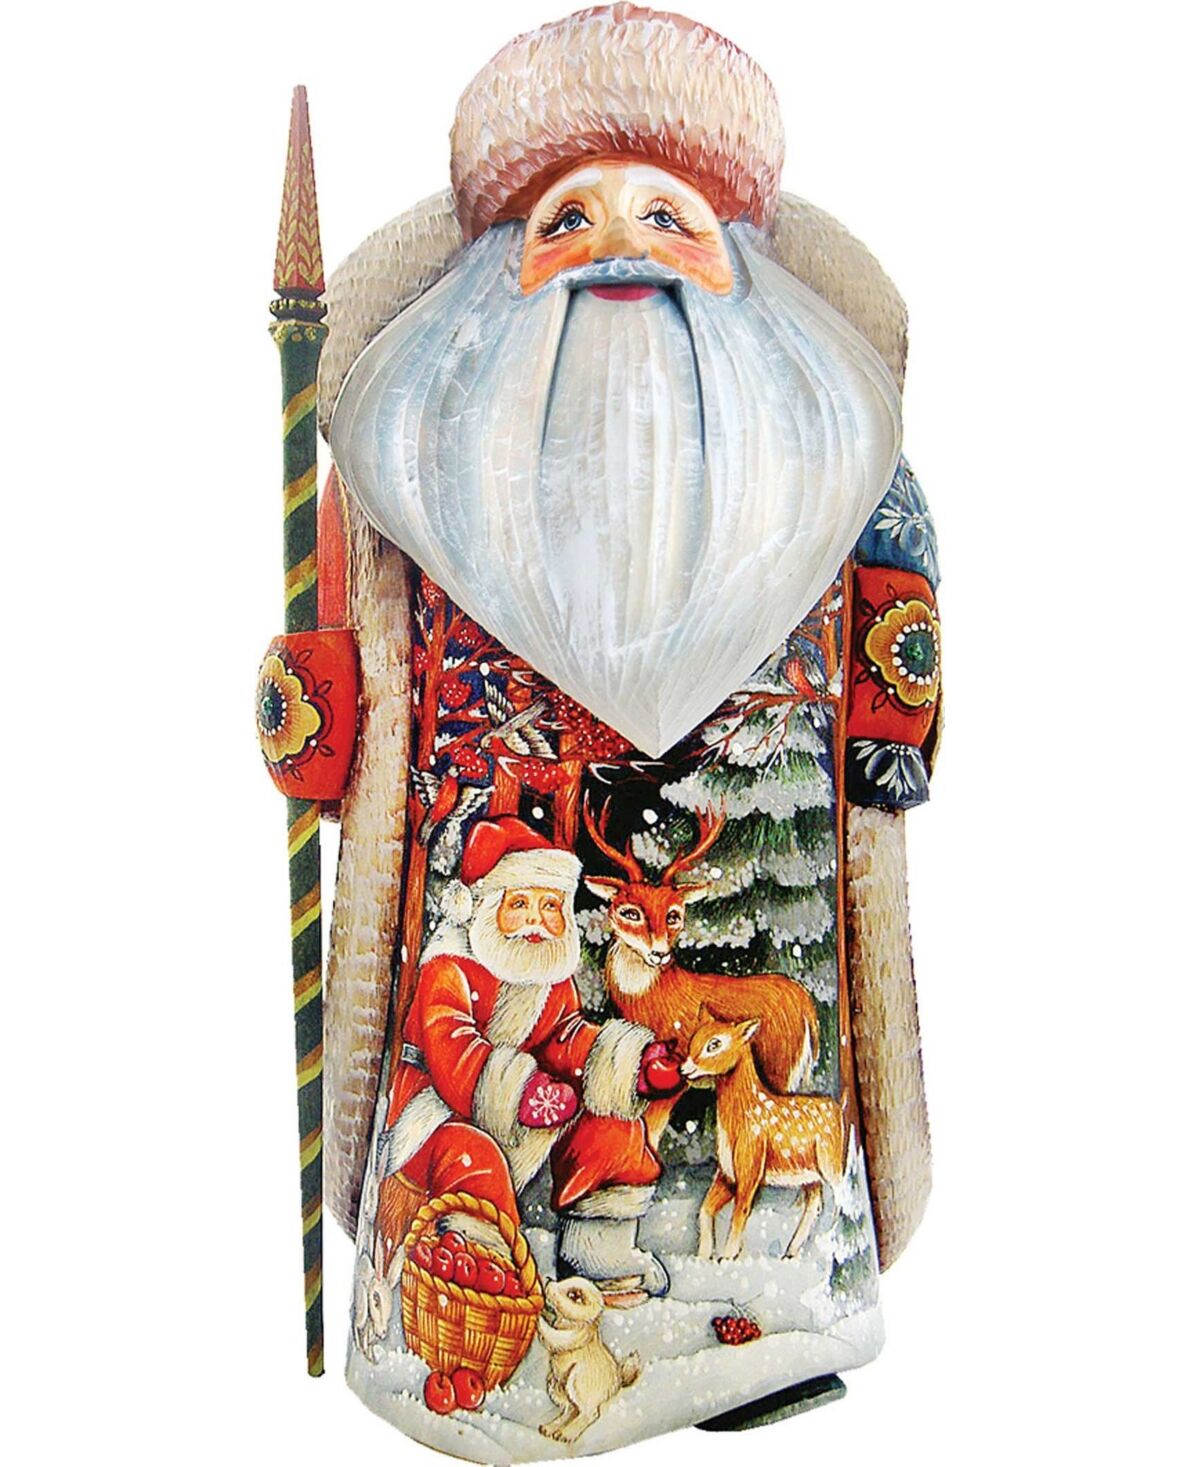 G.DeBrekht Woodcarved and Hand Painted Deer Friend Father Frost Santa Claus Figurine - Multi